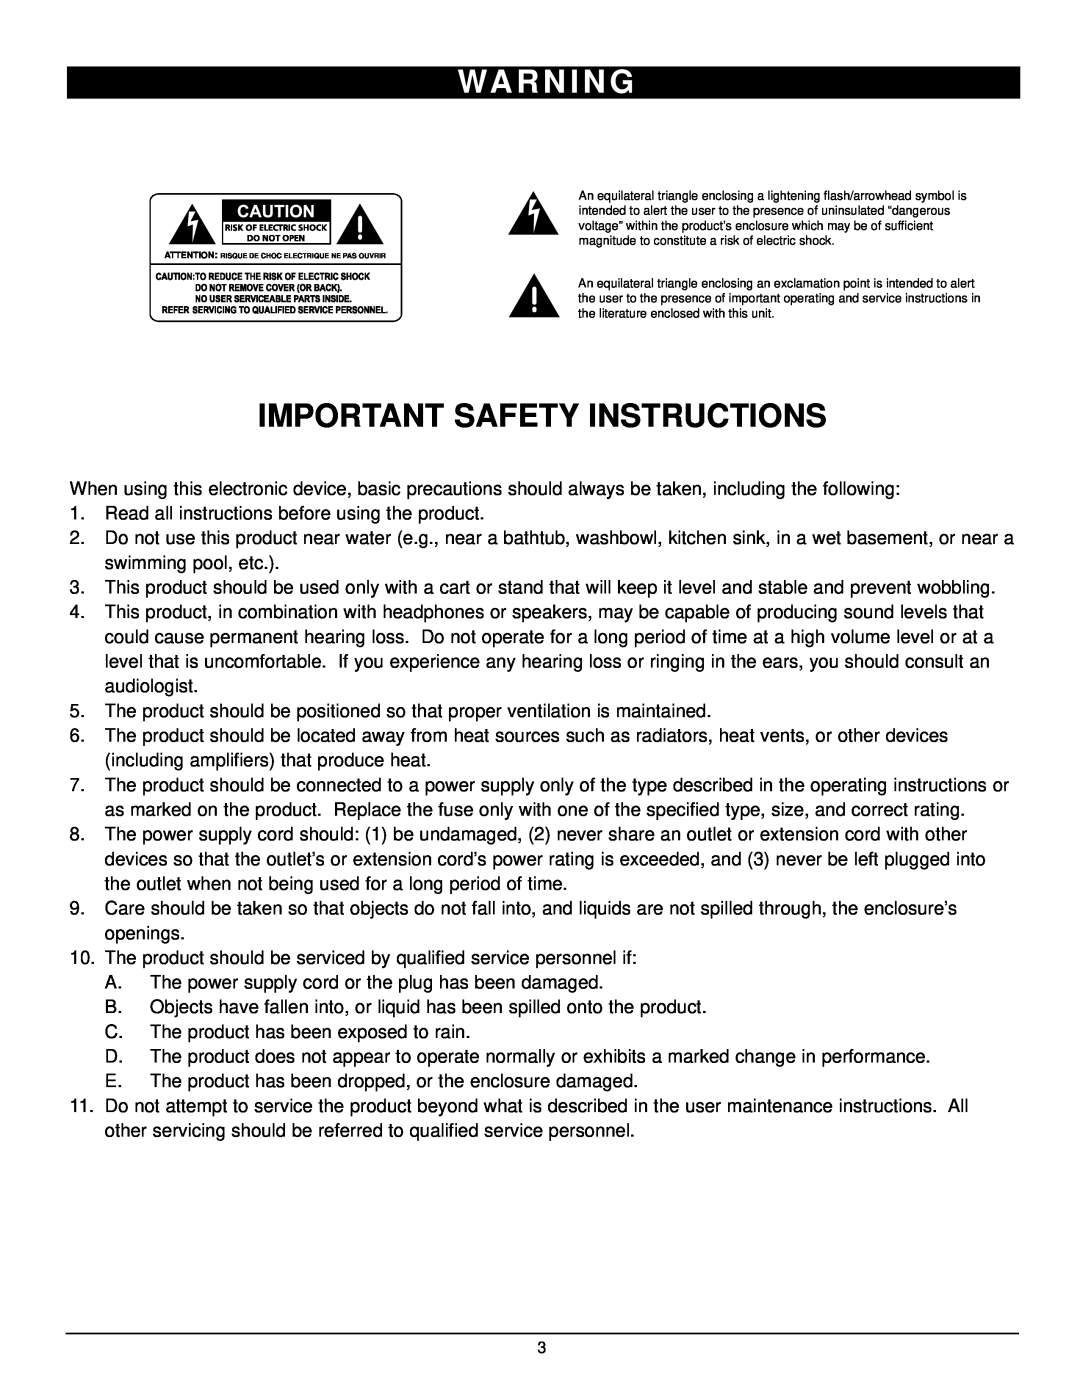 Nady Systems SD-2418 owner manual Wa R N I N G, Important Safety Instructions 